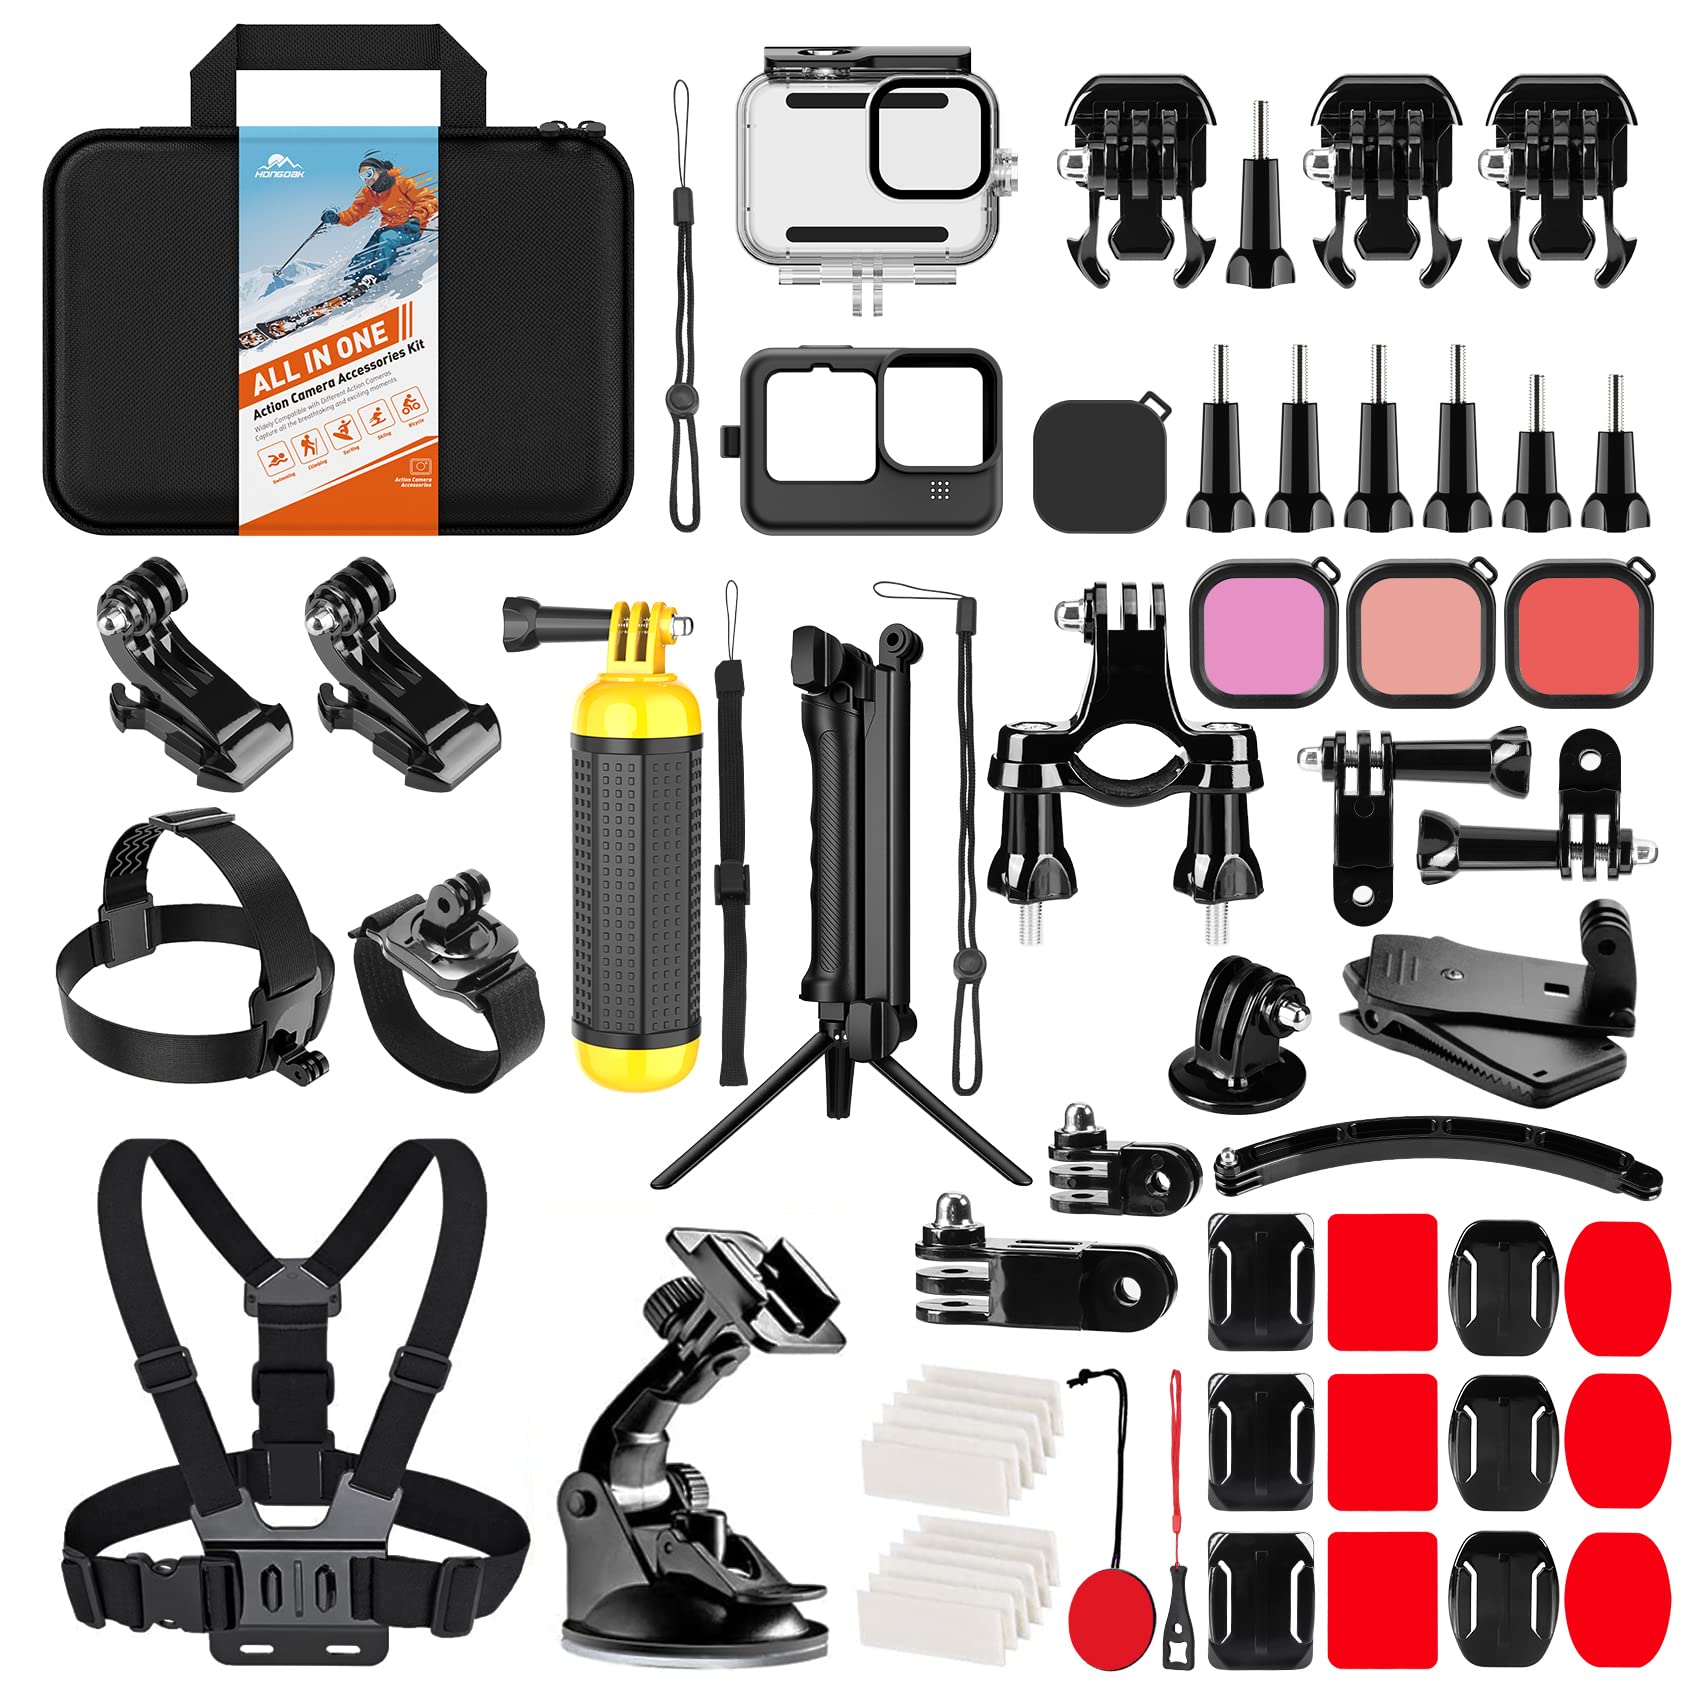 HONGDAK Action Camera Accessories Kit for GoPro Hero 11 10 9 Black, Waterproof Housing+Silicone Case+3-Way Adjustable Arm+Head Chest Strap+Bike Mount+Suction Cup+Floating Grip Bundle Set 63 in 1